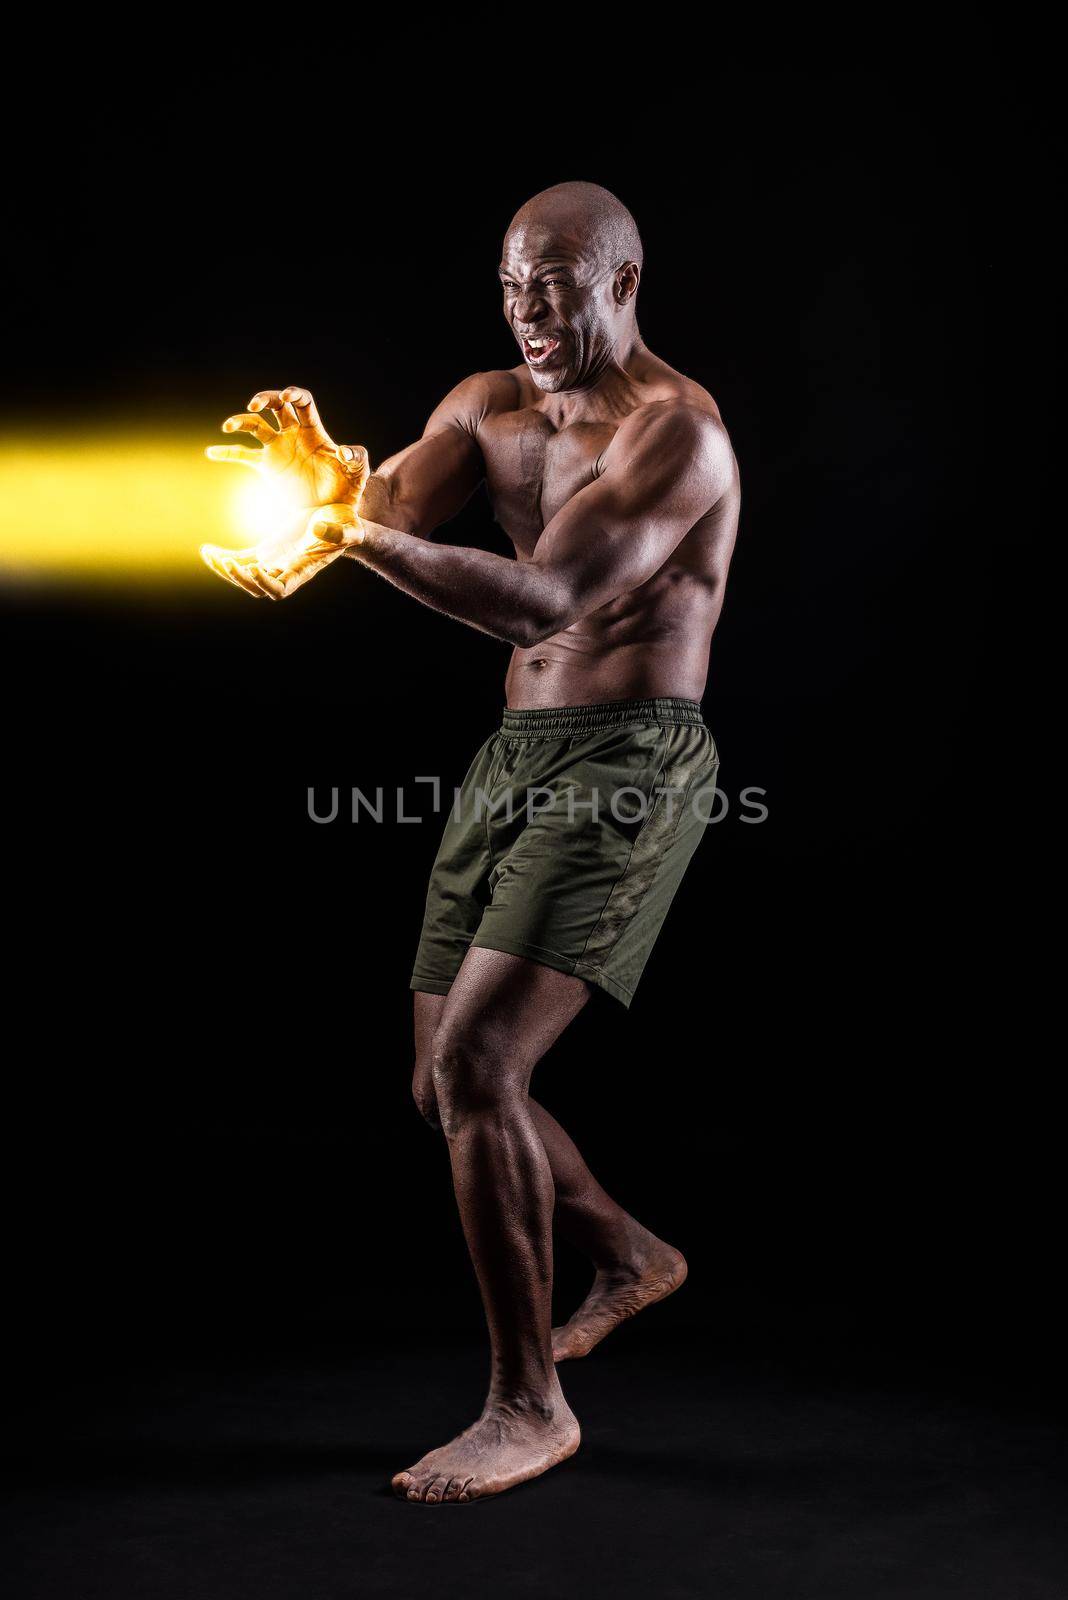 African American man doing a performance of a famous Japanese cartoon character performing a power throw by ivanmoreno